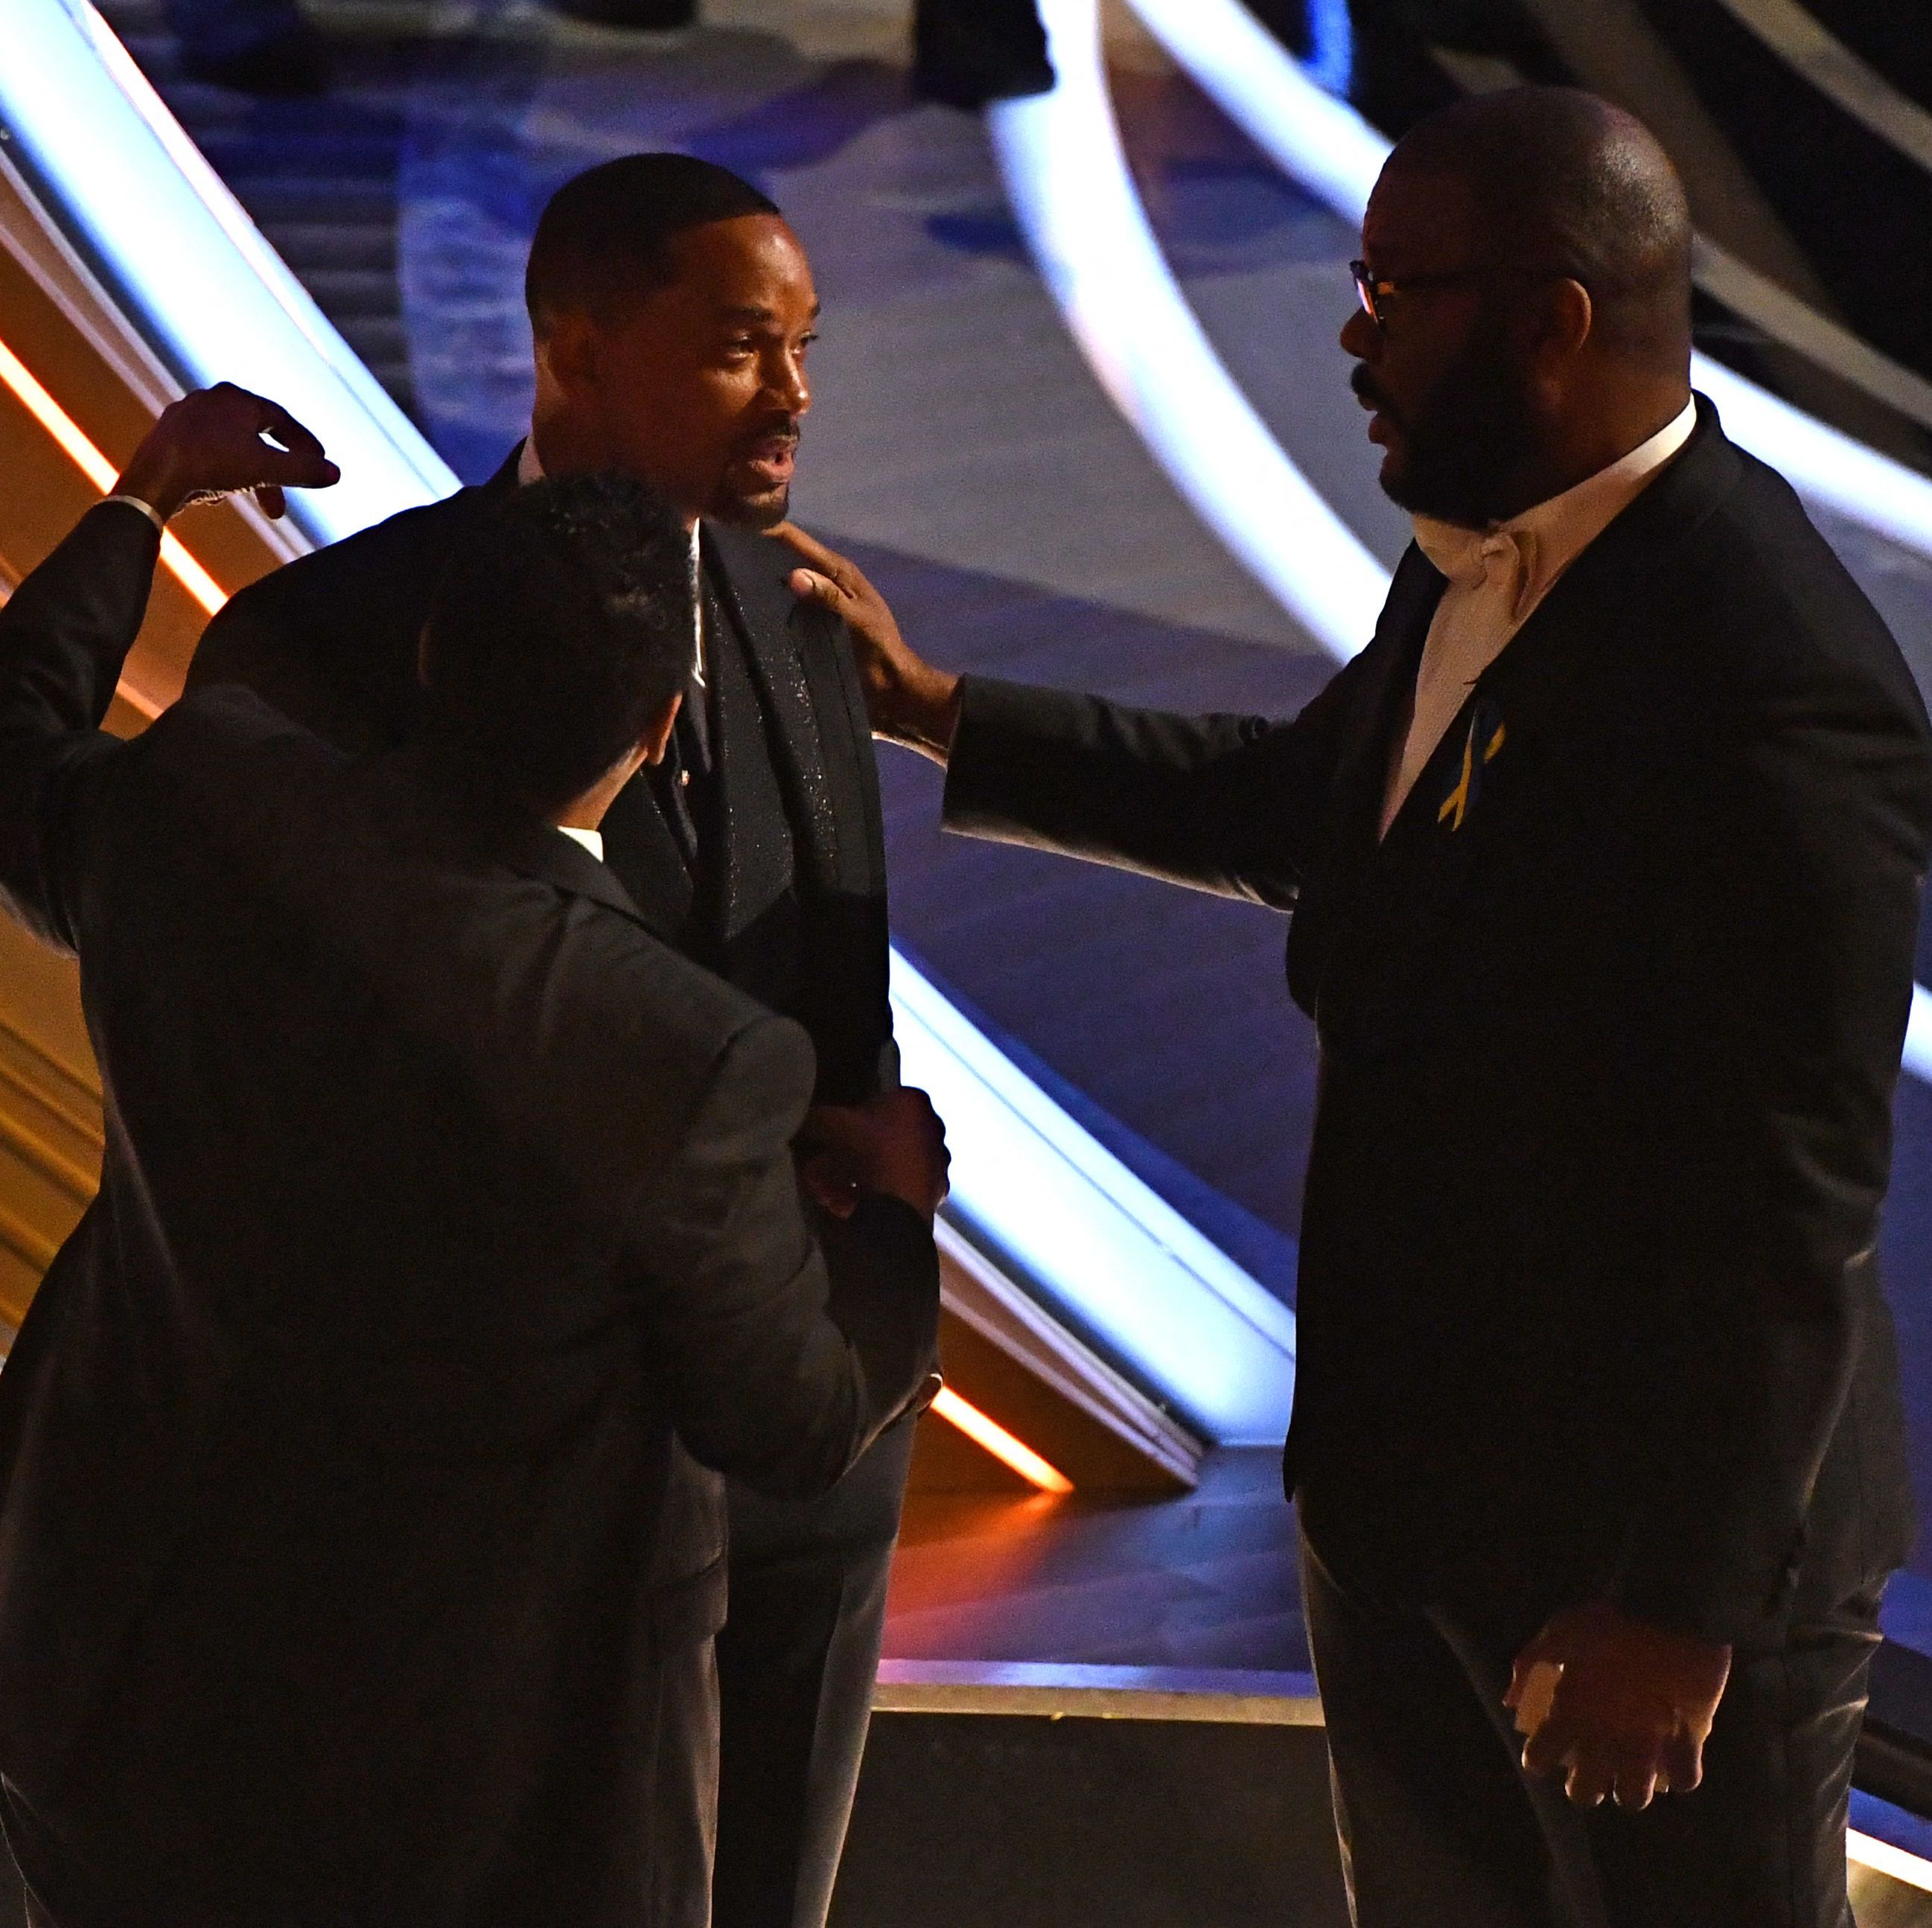 Will Smith's PR Consulted Him During the Commercial Break After Chris Rock Slap at the Oscars